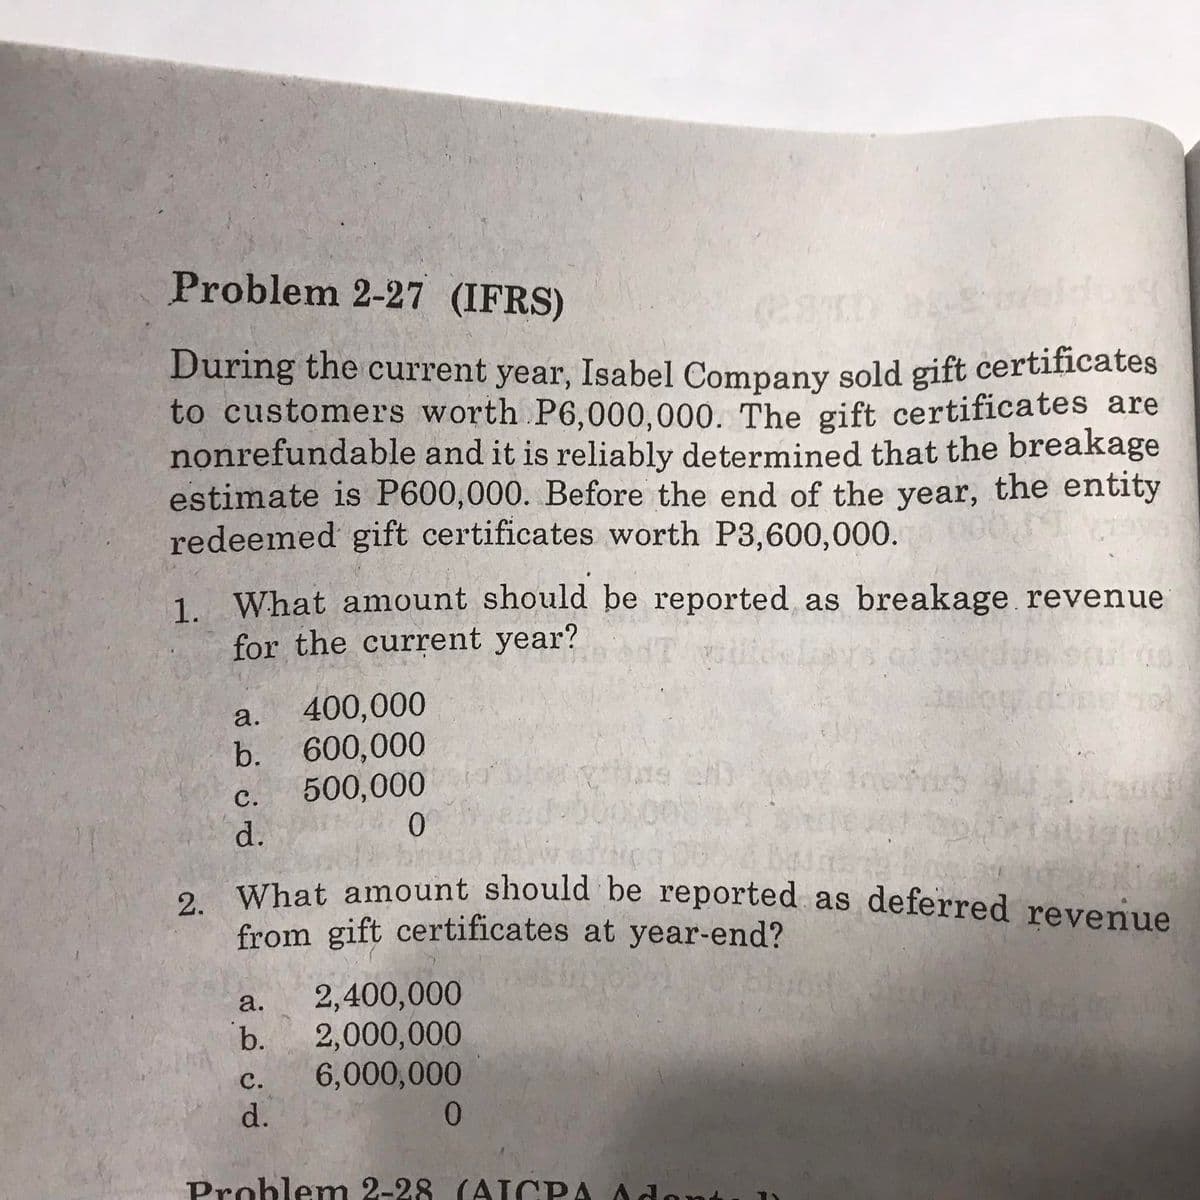 Problem 2-27 (IFRS)
During the current year, Isabel Company sold gift certificates
to customers worth P6,000,000. The gift certificates are
nonrefundable and it is reliably determined that the breakage
estimate is P600,000. Before the end of the year, the entity
redeemed gift certificates worth P3,600,000.
1. What amount should be reported as breakage revenue
for the current year?
a.
400,000
b. 600,000
500,000
0.
ns en
с.
d.
What, amount should be reported as deferred revenue
from gift certificates at year-end?
a.
2,400,000
b.
2,000,000
с.
6,000,000
d.
Problemn 2-28 (AT CPA Adont
2.
